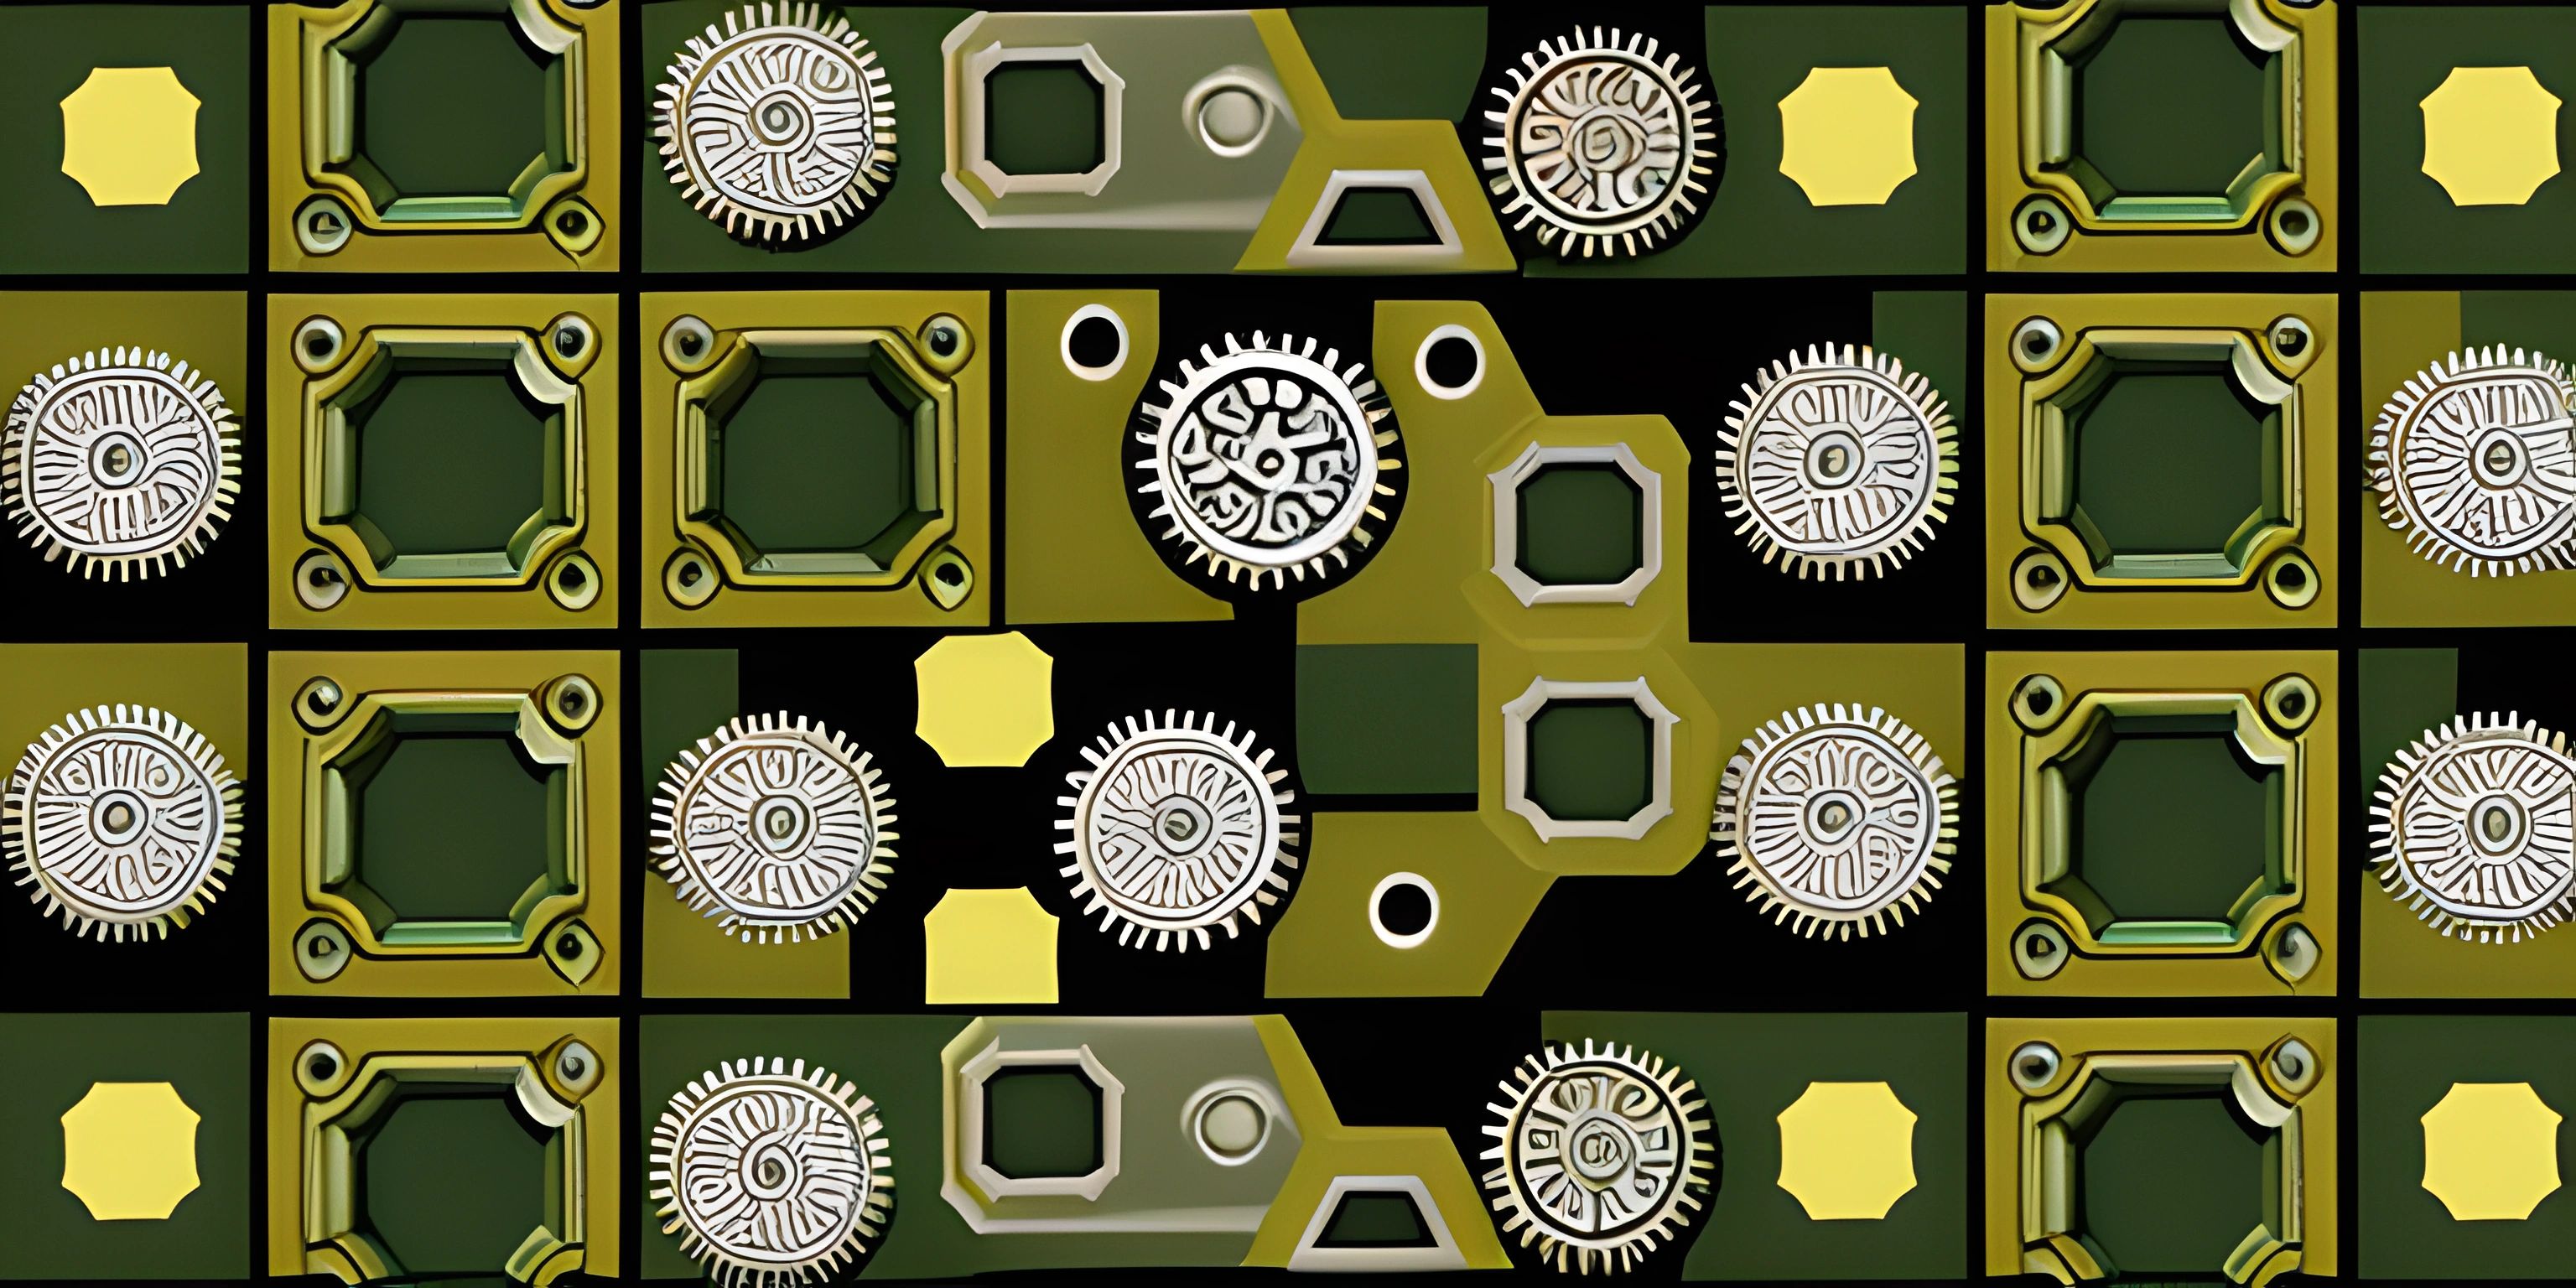 the squares of the computer are all different colors of green and yellow with gears in them